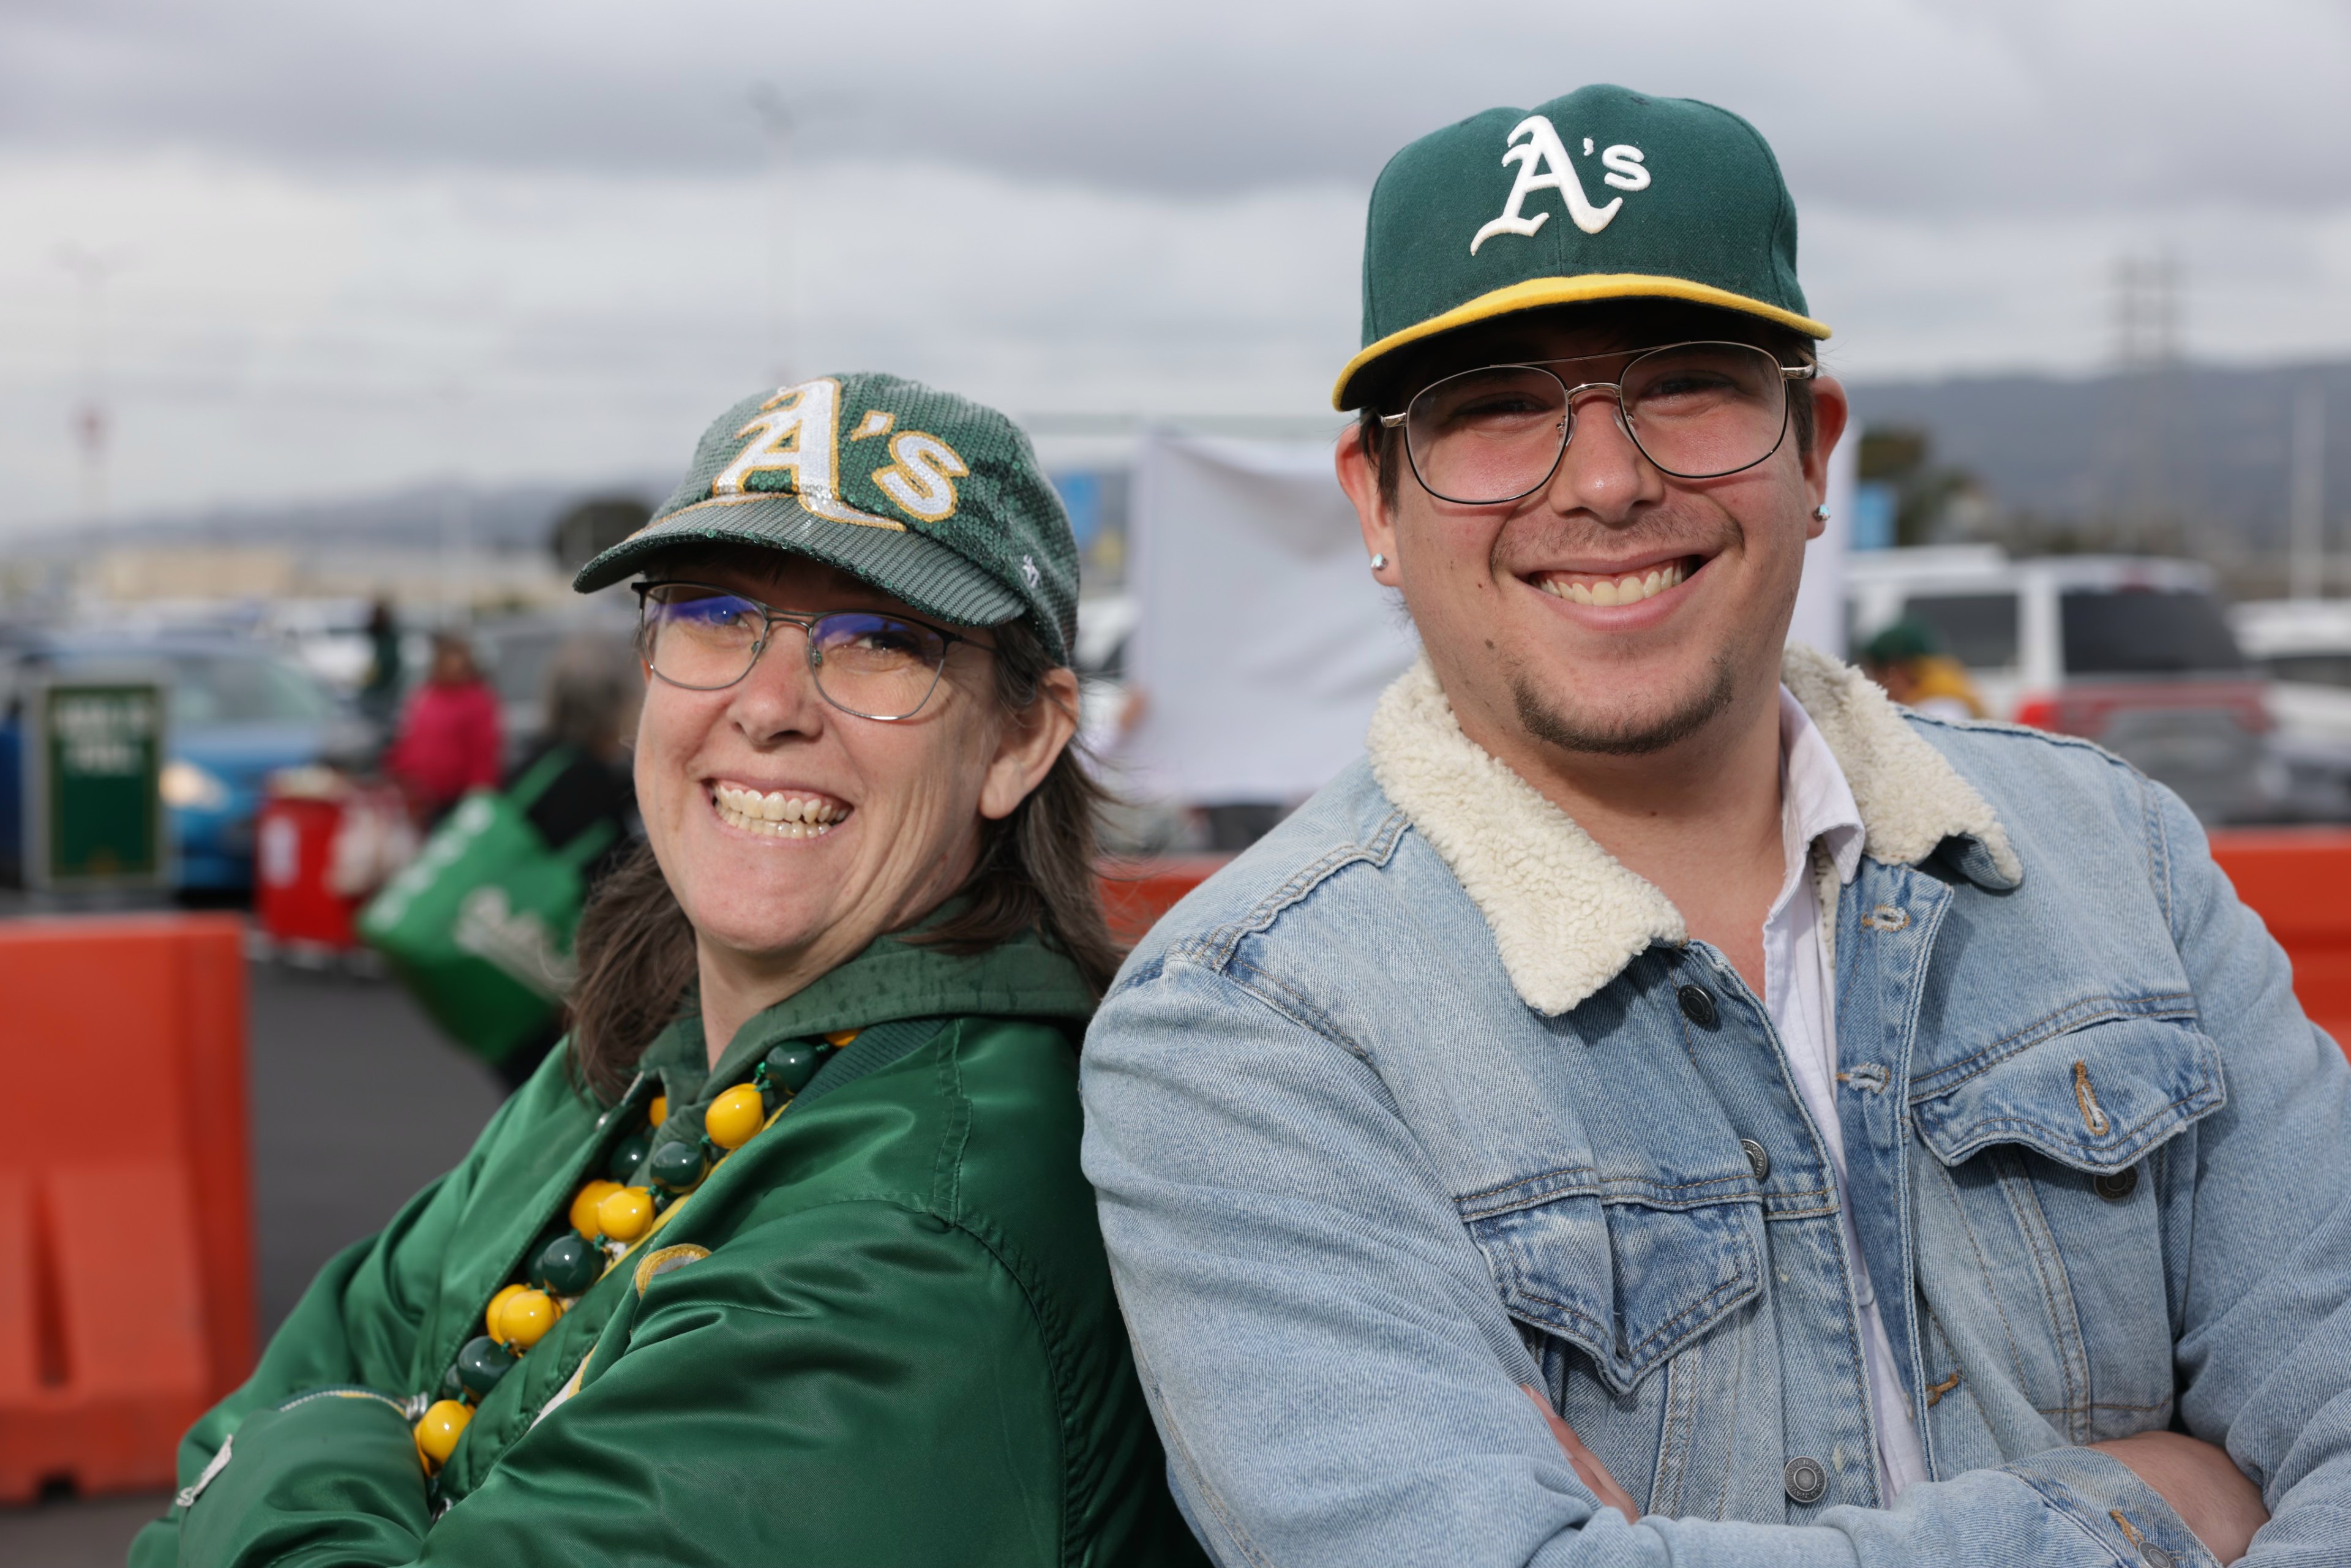 Two people smiling, wearing Oakland A's caps, with a stadium in the background.